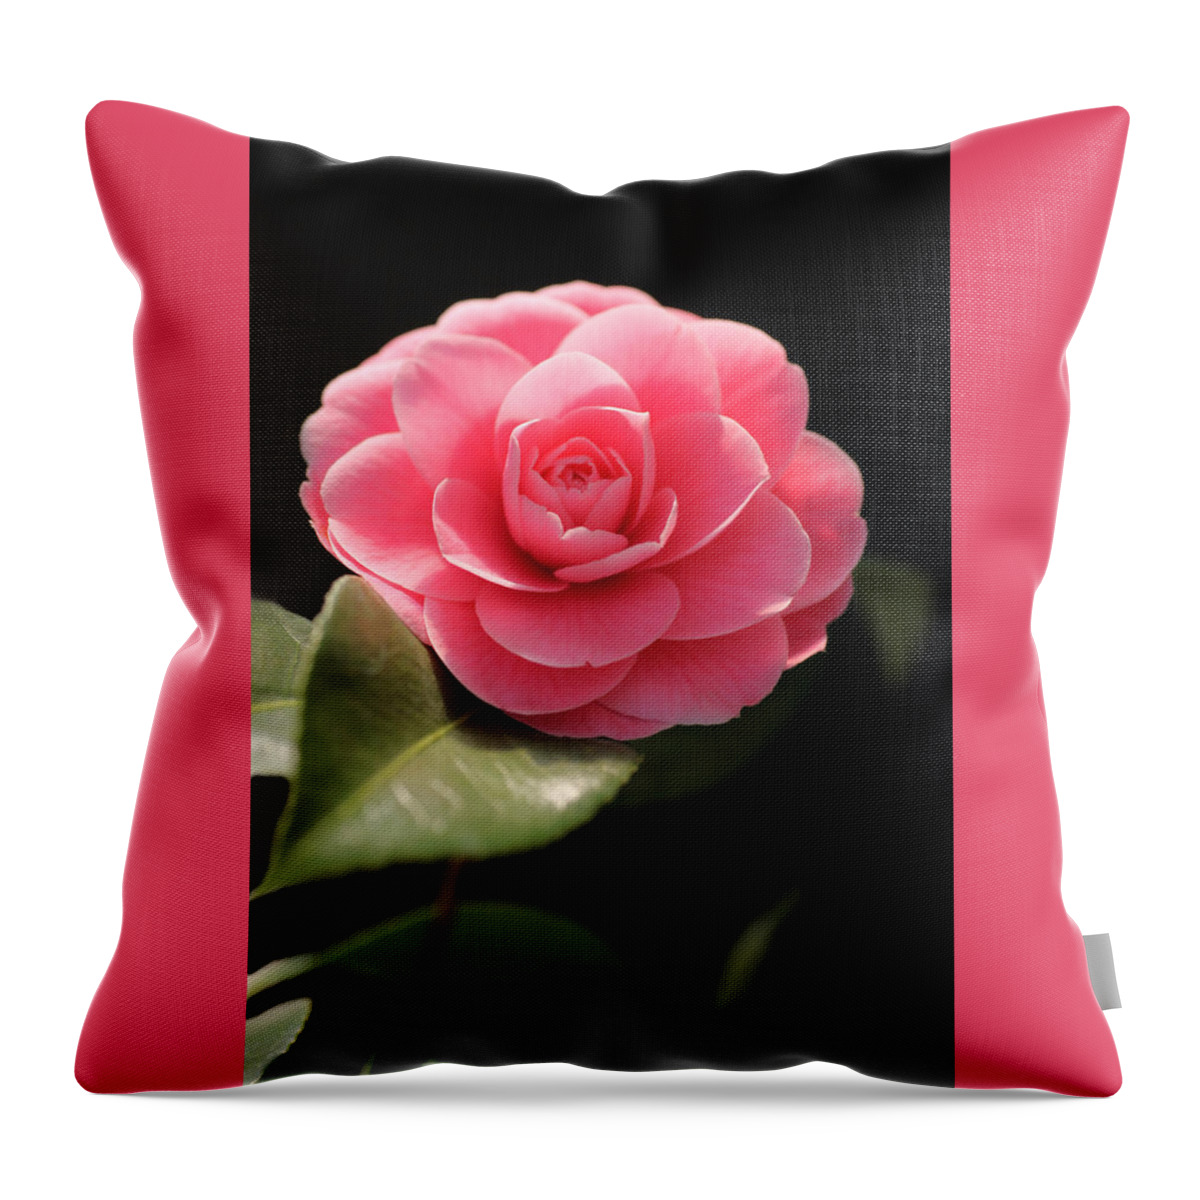 Romantic Throw Pillow featuring the photograph Romantic Camellia by Tammy Pool